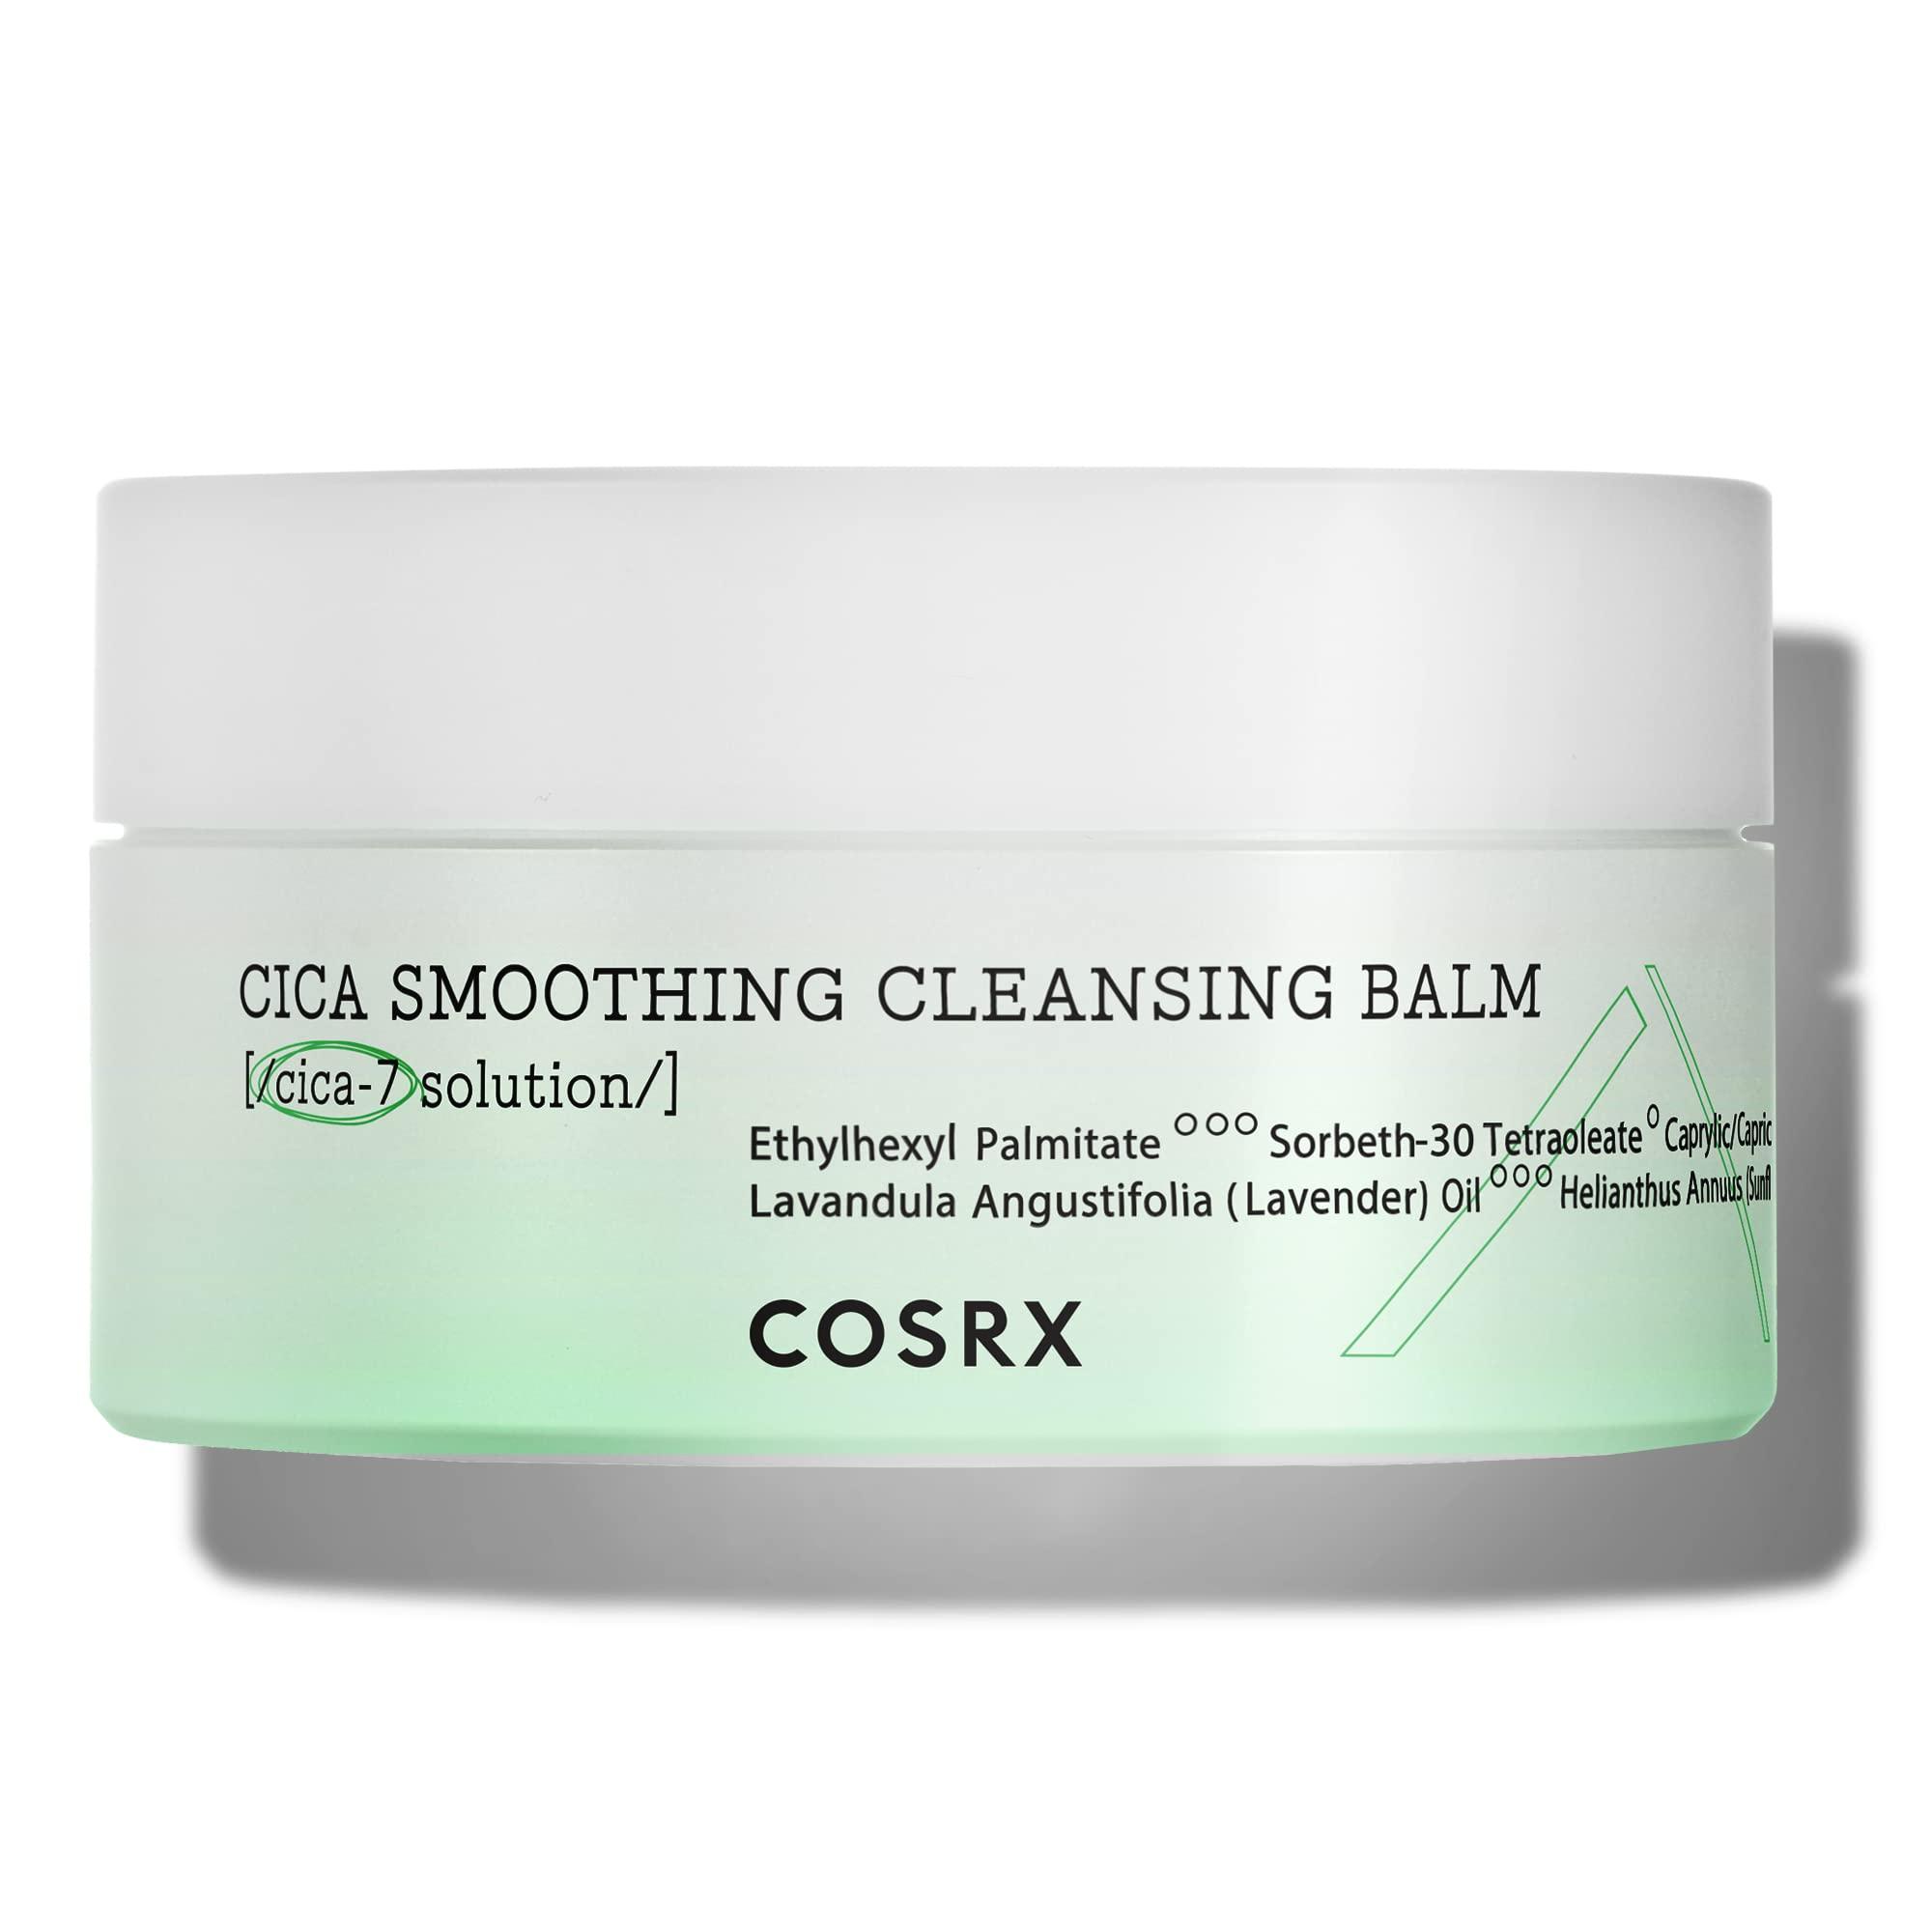 Pure Fit Cica Smoothing Cleansing Balm